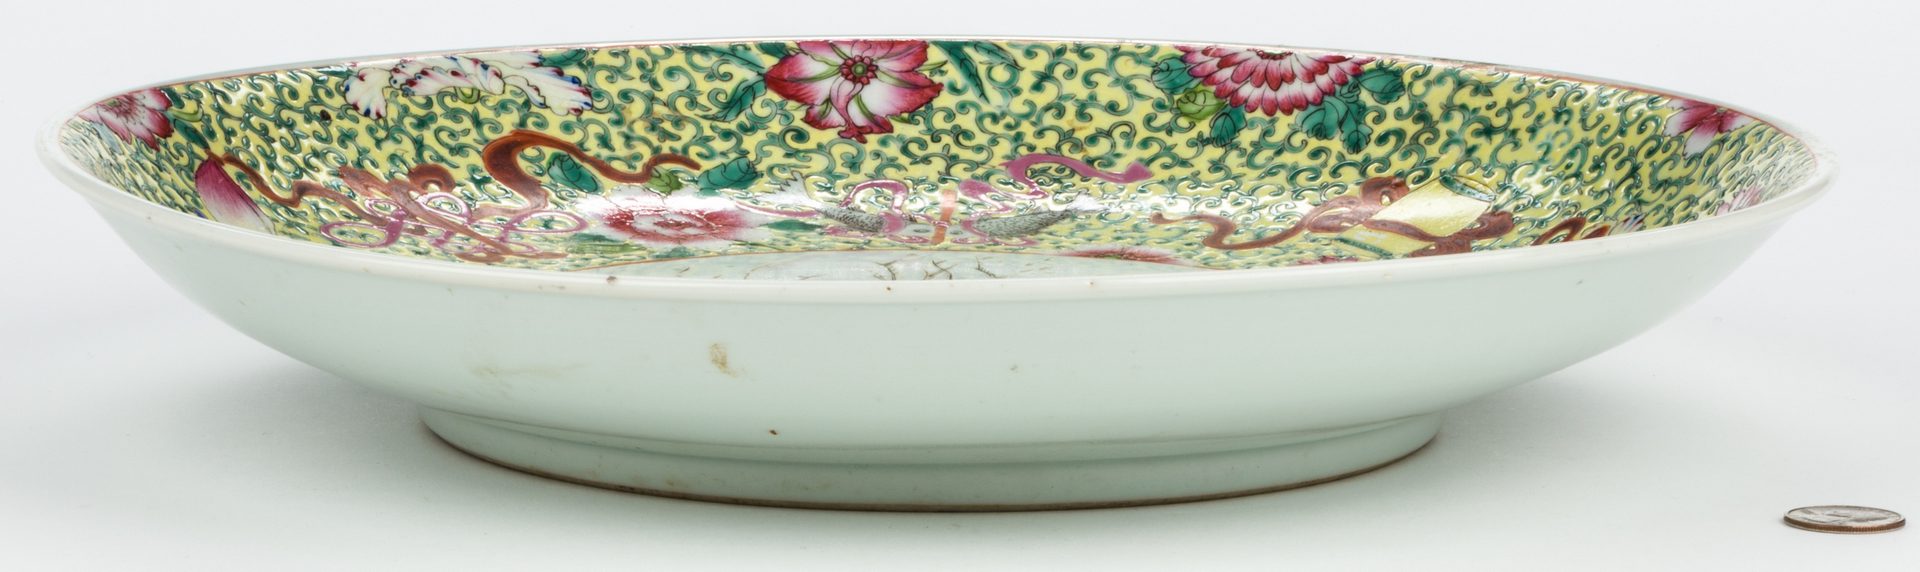 Lot 20: Chinese Famille Rose Porcelain Charger